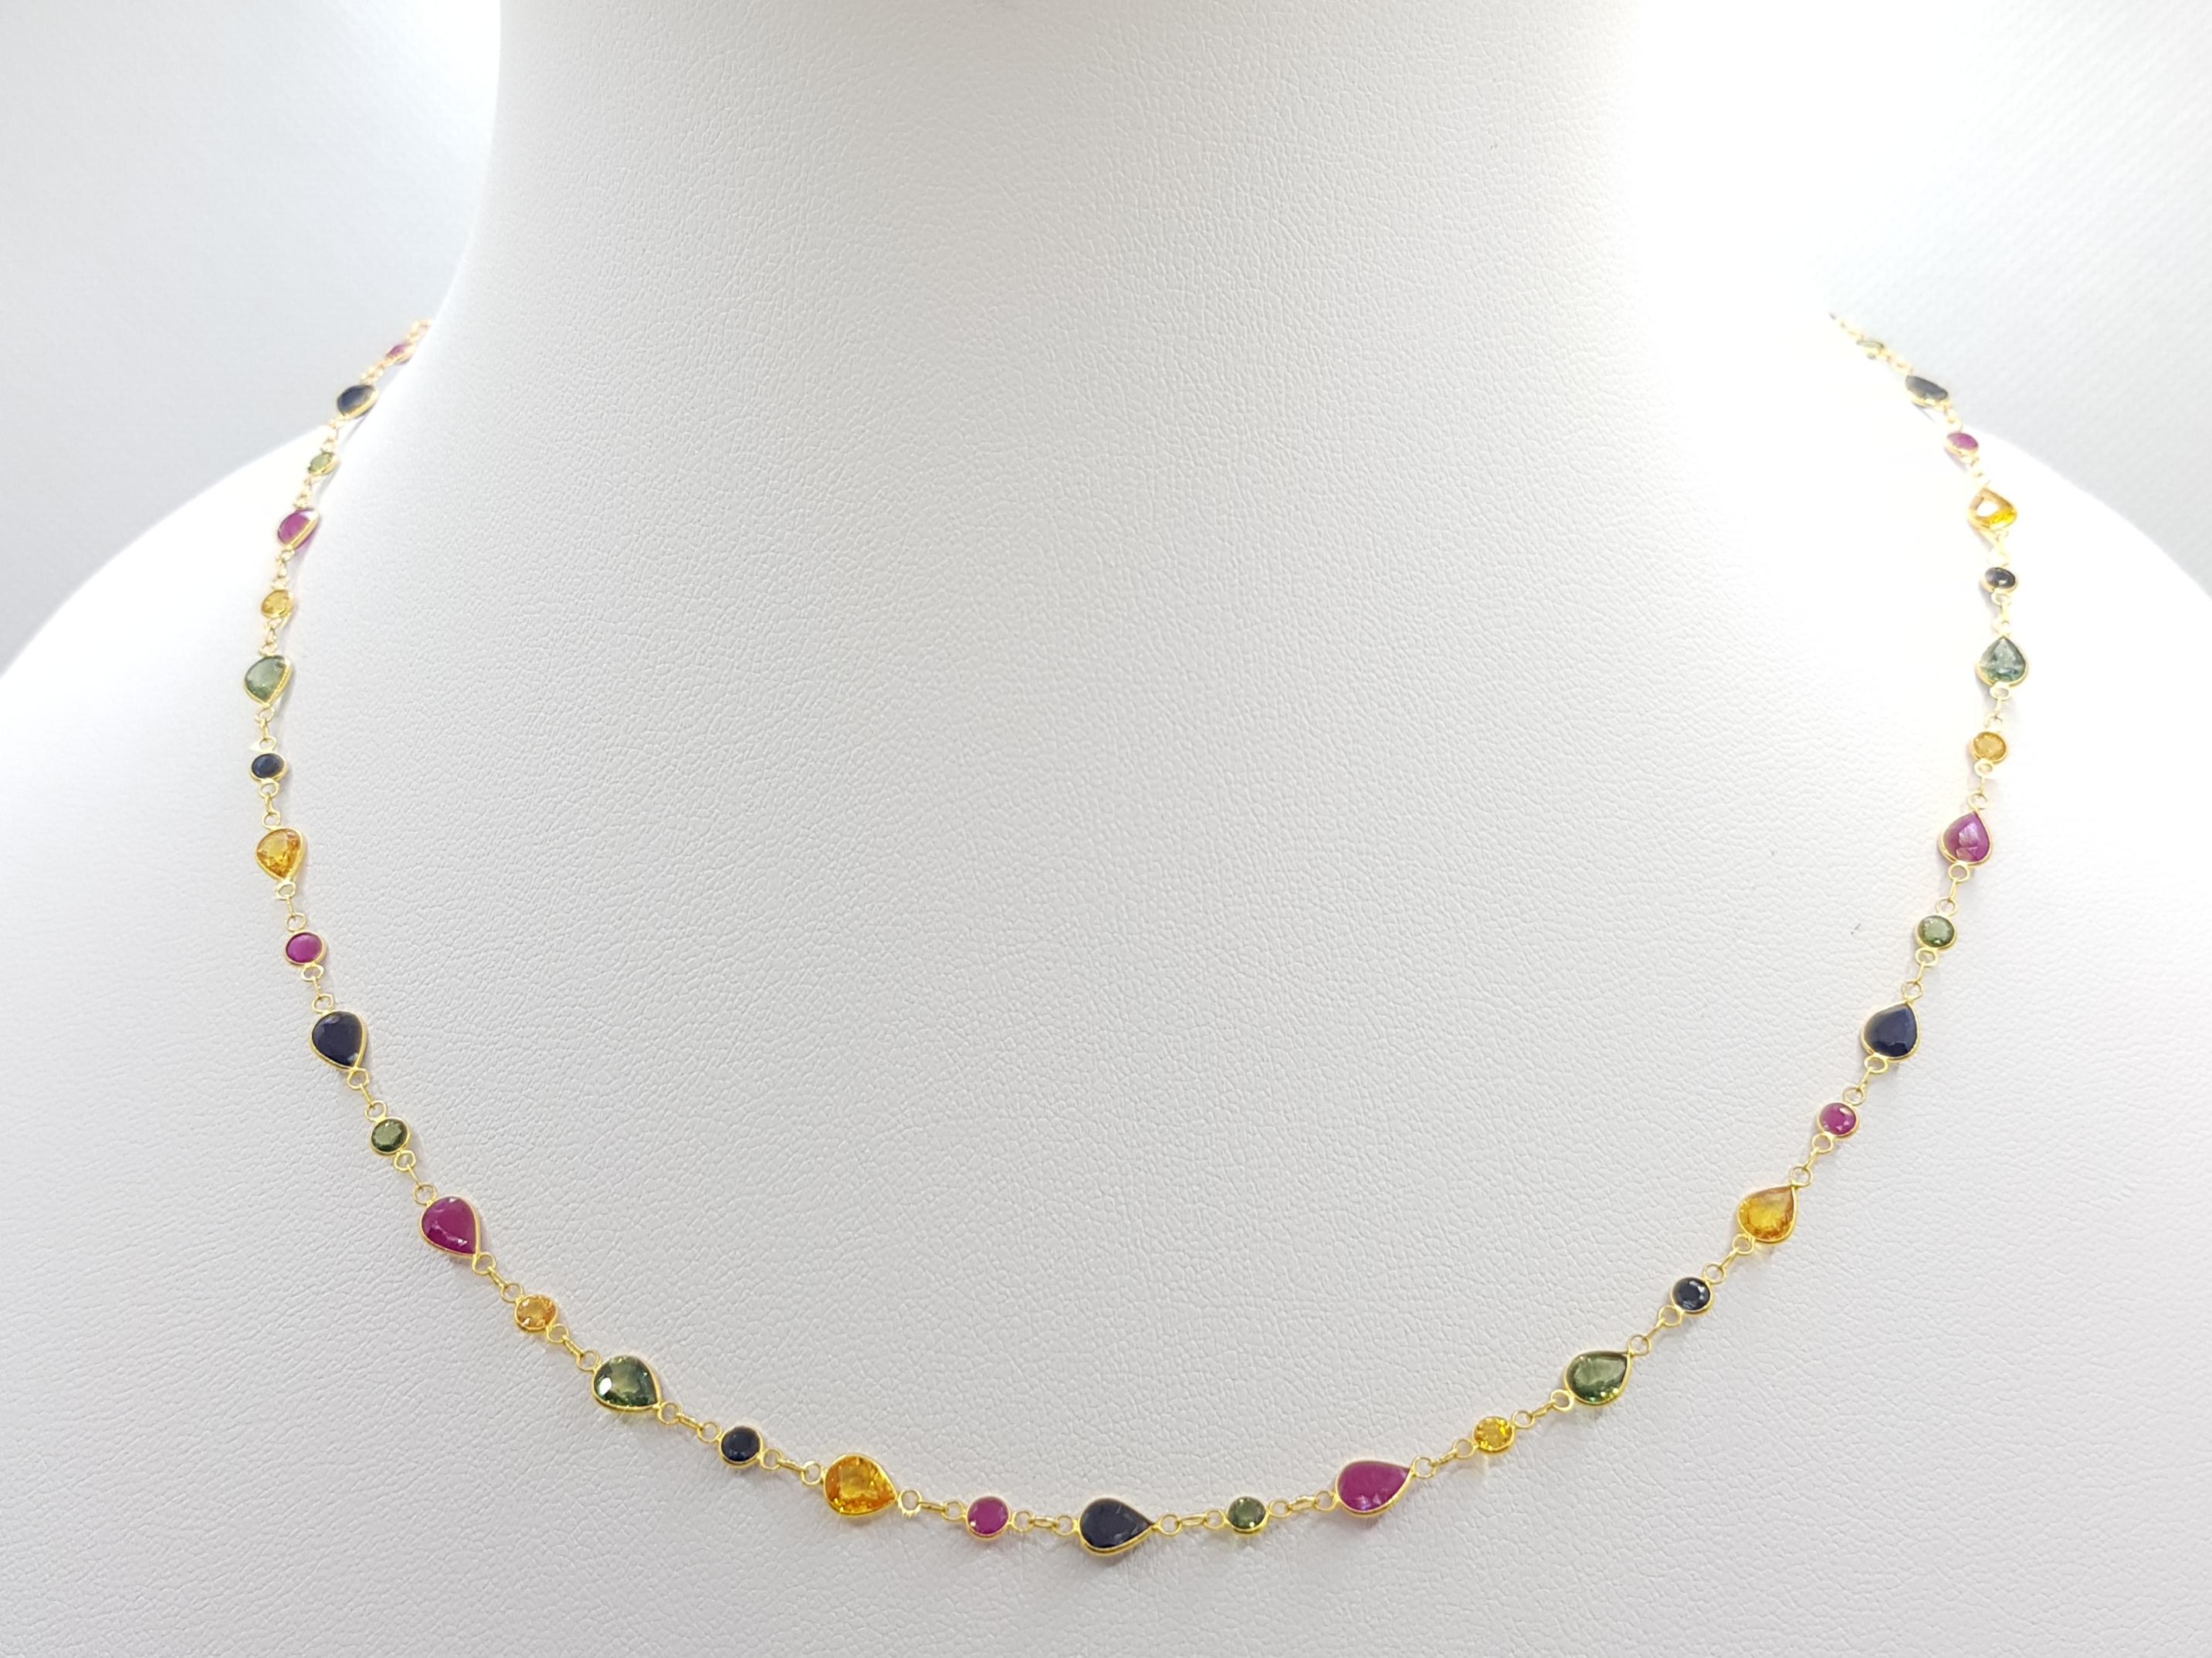 Multi-Color Sapphire and Ruby 11.60 carats Necklace set in 18 Karat Gold Settings

Width:  0.4 cm 
Length: 47.0 cm
Total Weight: 4.1 grams

